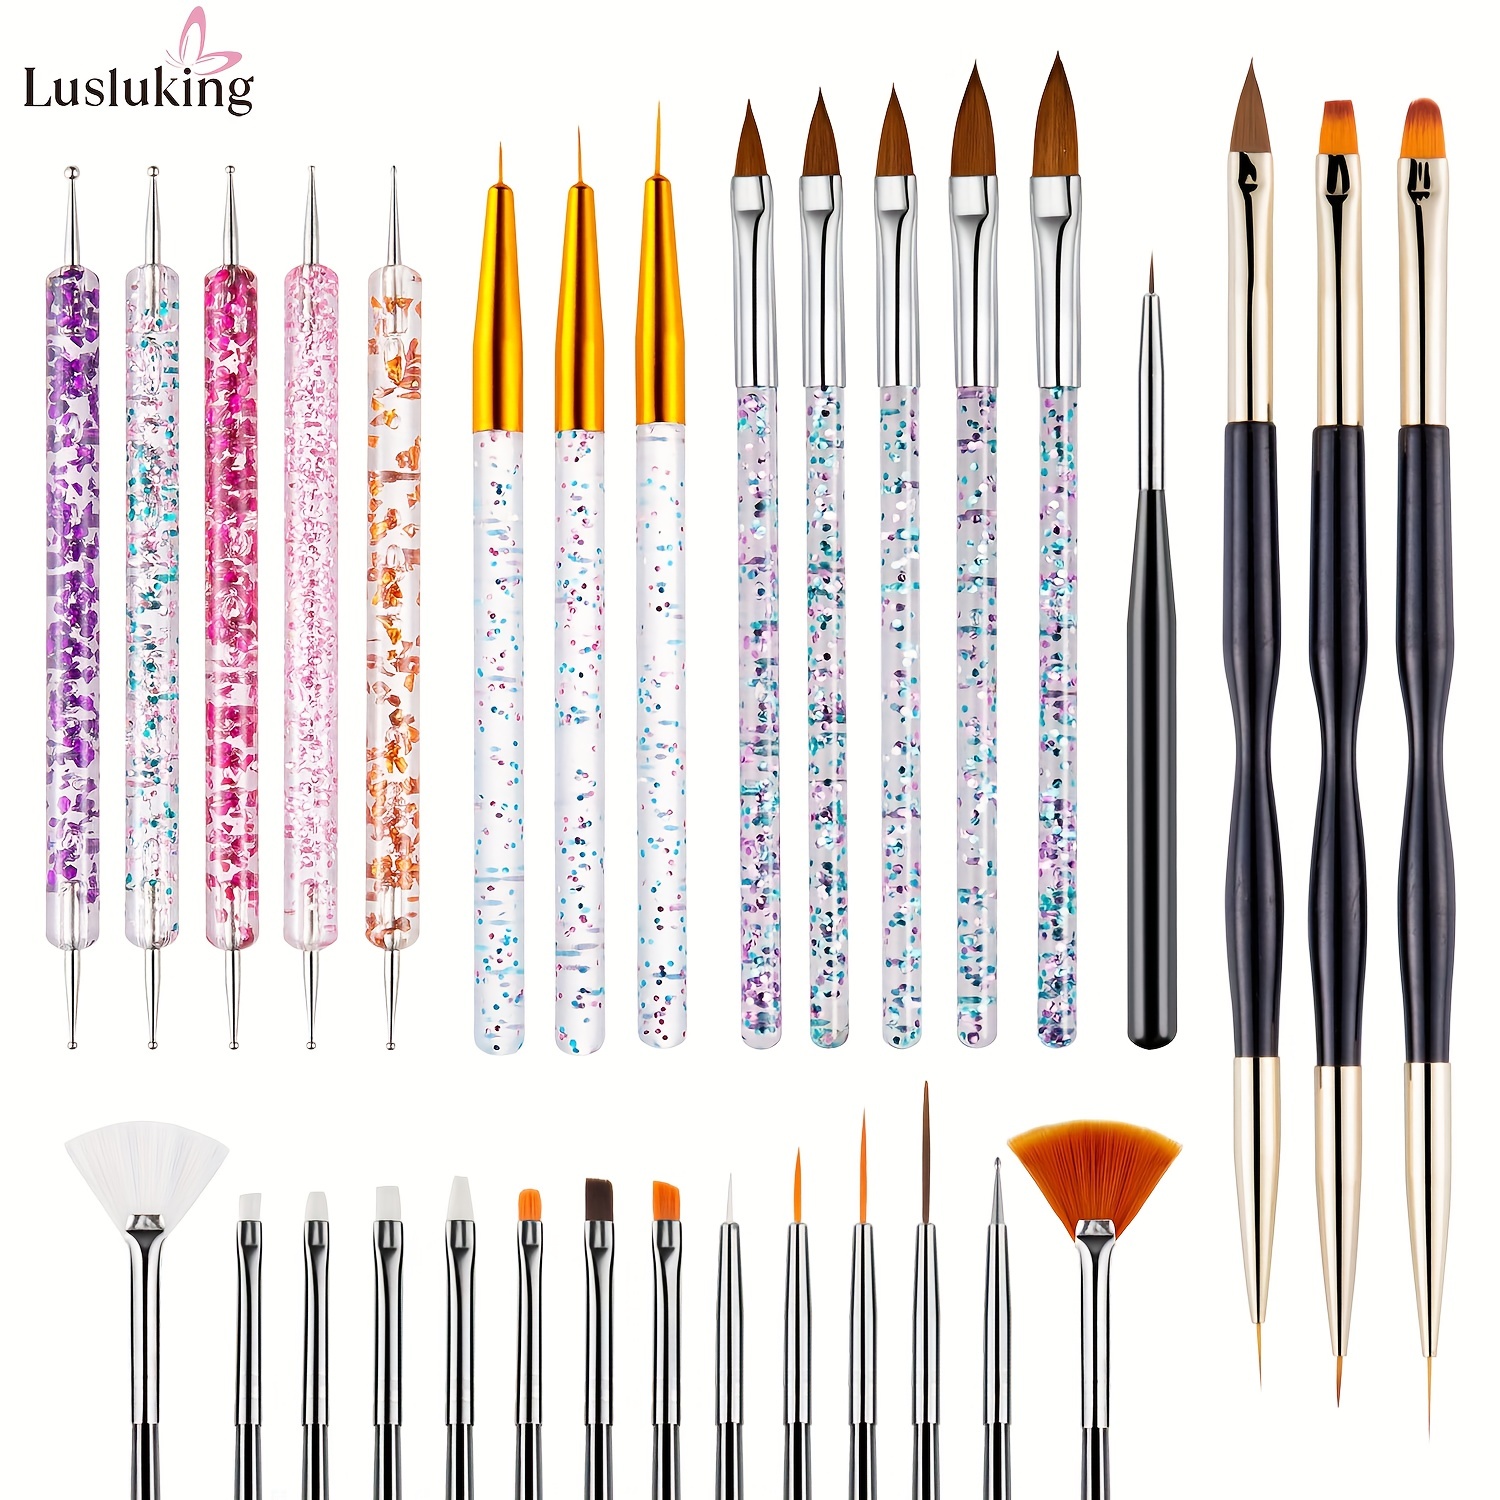 

31 Pcs/set Nail Art Brush Set Light Therapy Color Drawing Line Drawing Flower Halo Dyeing Nail Art Tools Set